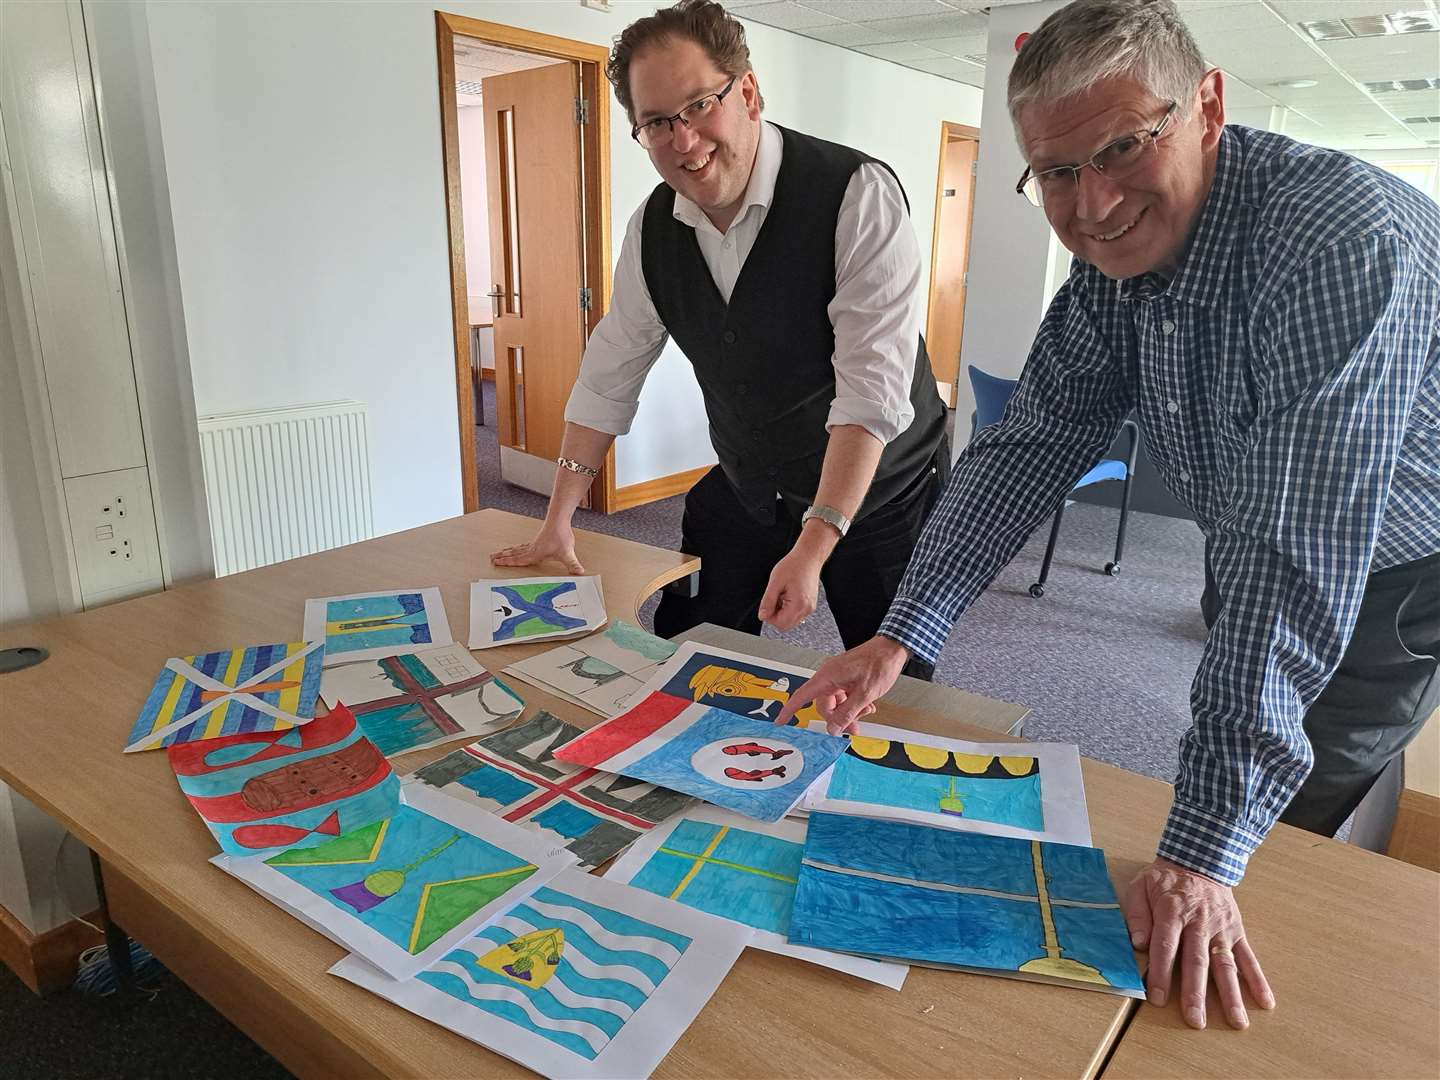 Lord lieutenant of Banffshire Andrew Simpson (right) and vexillologist Philip Tibbetts look through competition entries.